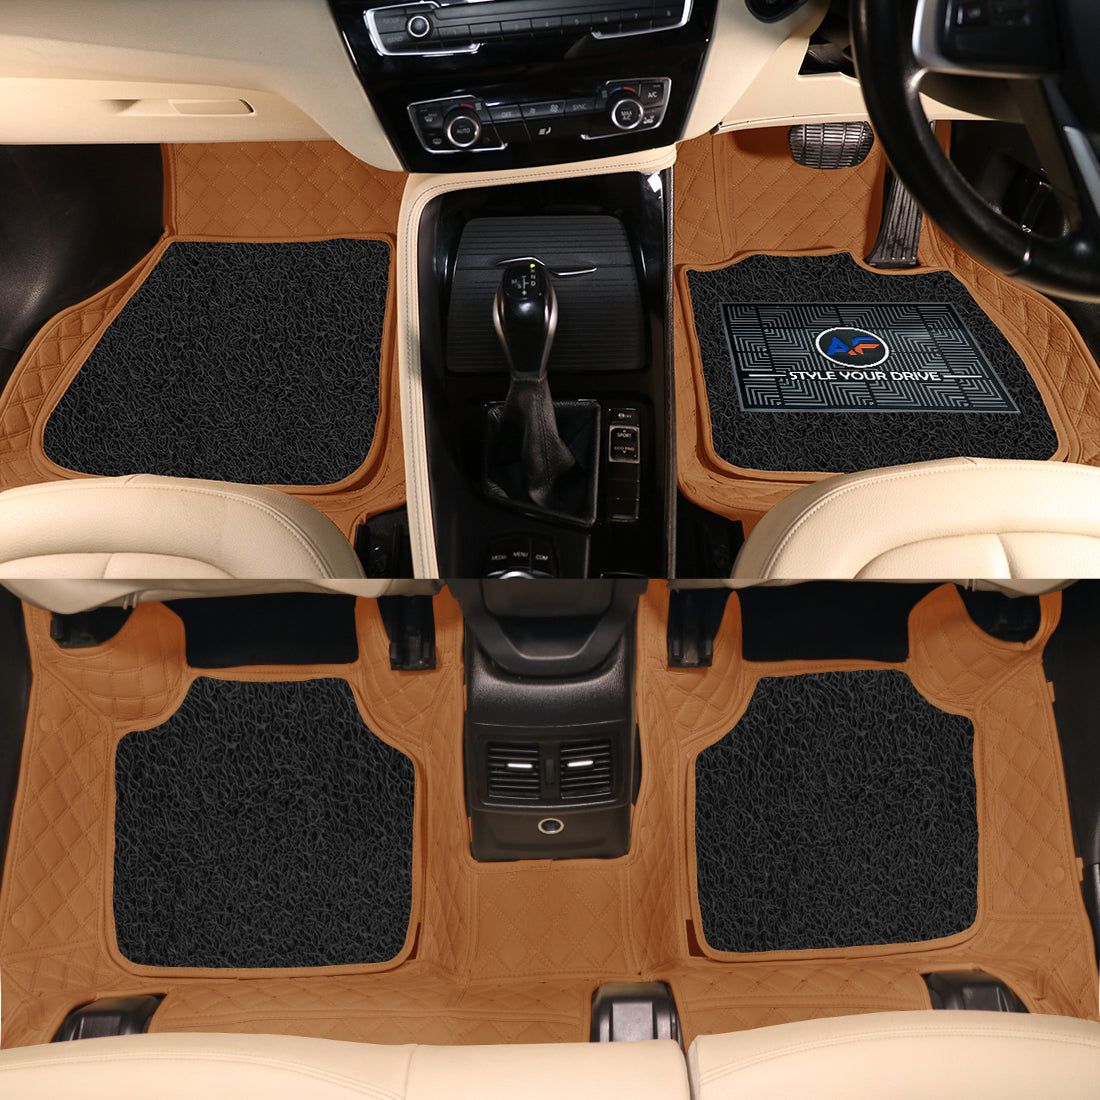 Mercedes S500 2015 7D Luxury Car Mat, All Weather Proof, Anti-Skid, 100% Waterproof & Odorless with Unique Diamond Fish Design (24mm Luxury PU Leather, 2 Rows)